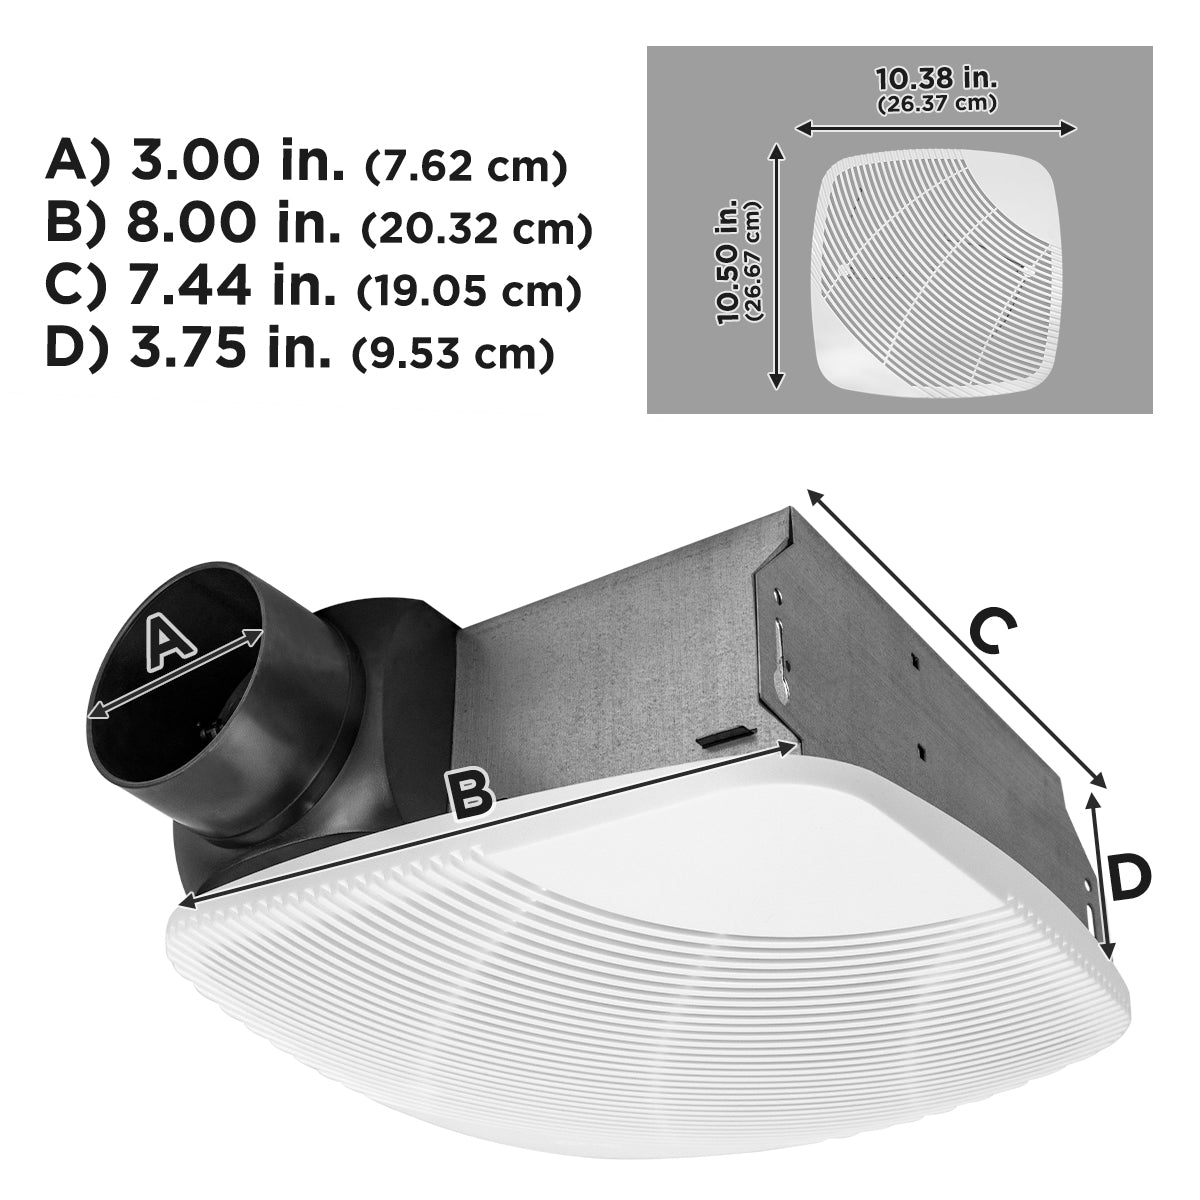 NuVent Contractor Series Ceiling/Wall Exhaust Bath Fans